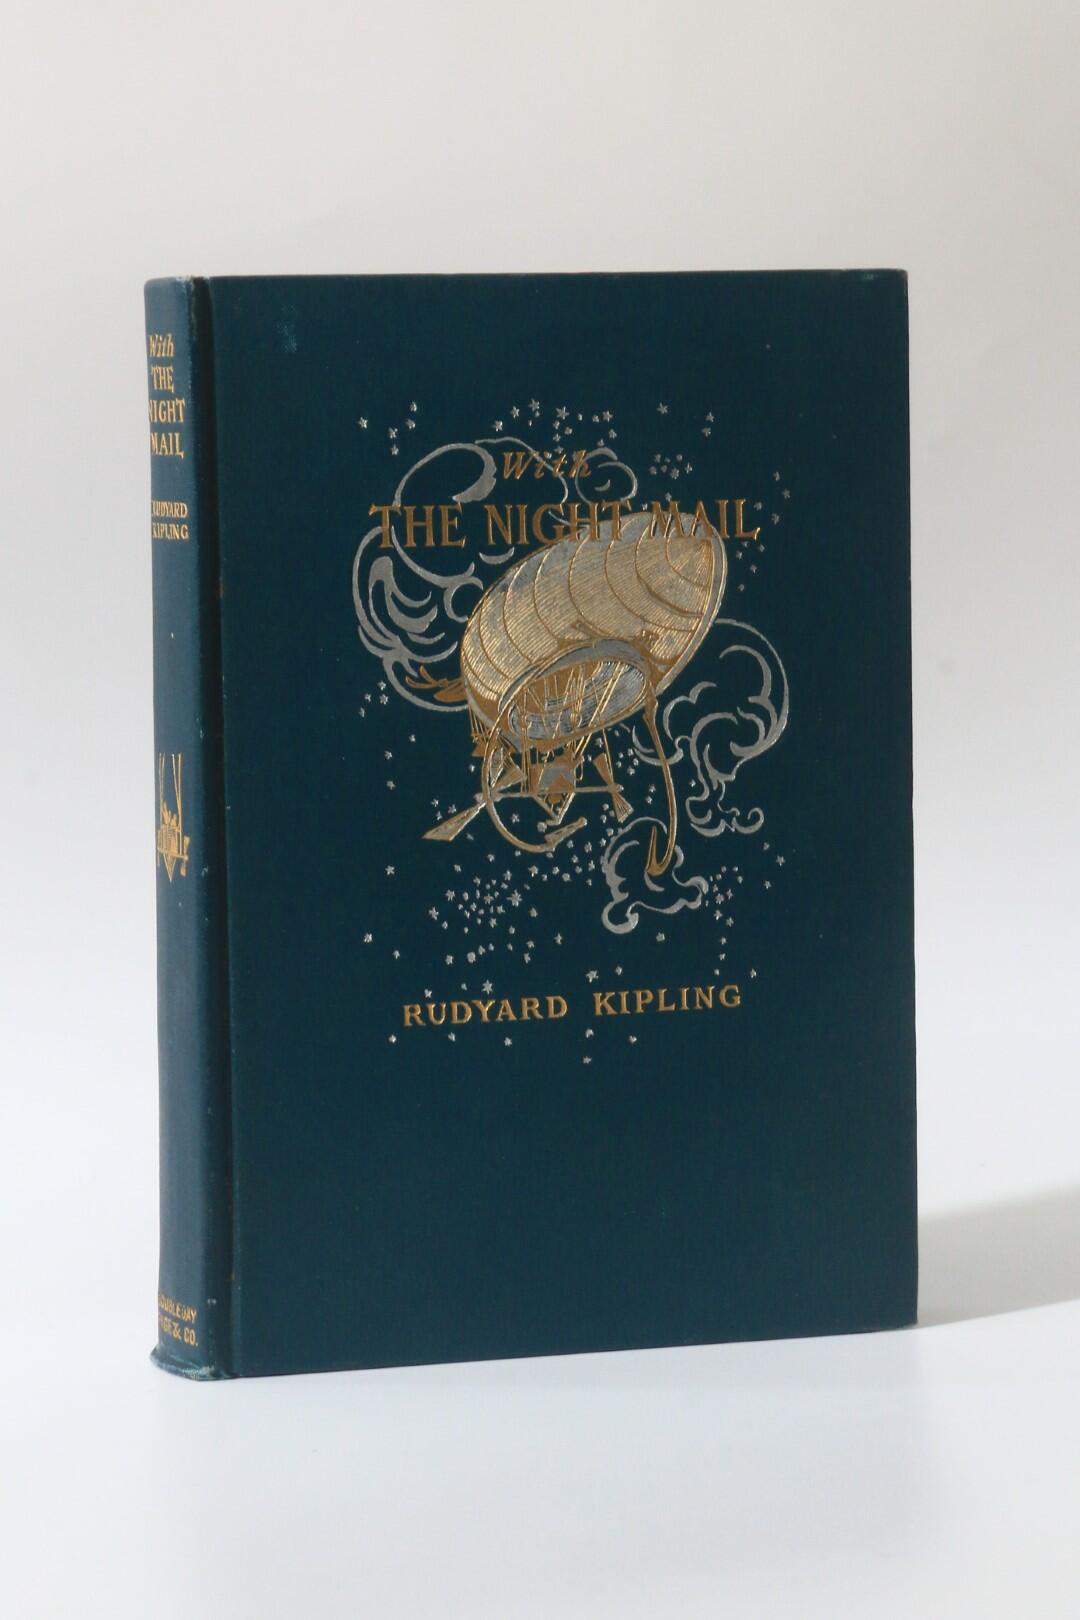 Rudyard Kipling - With the Night Mail - Doubleday, Page & Co., 1909, First Edition.